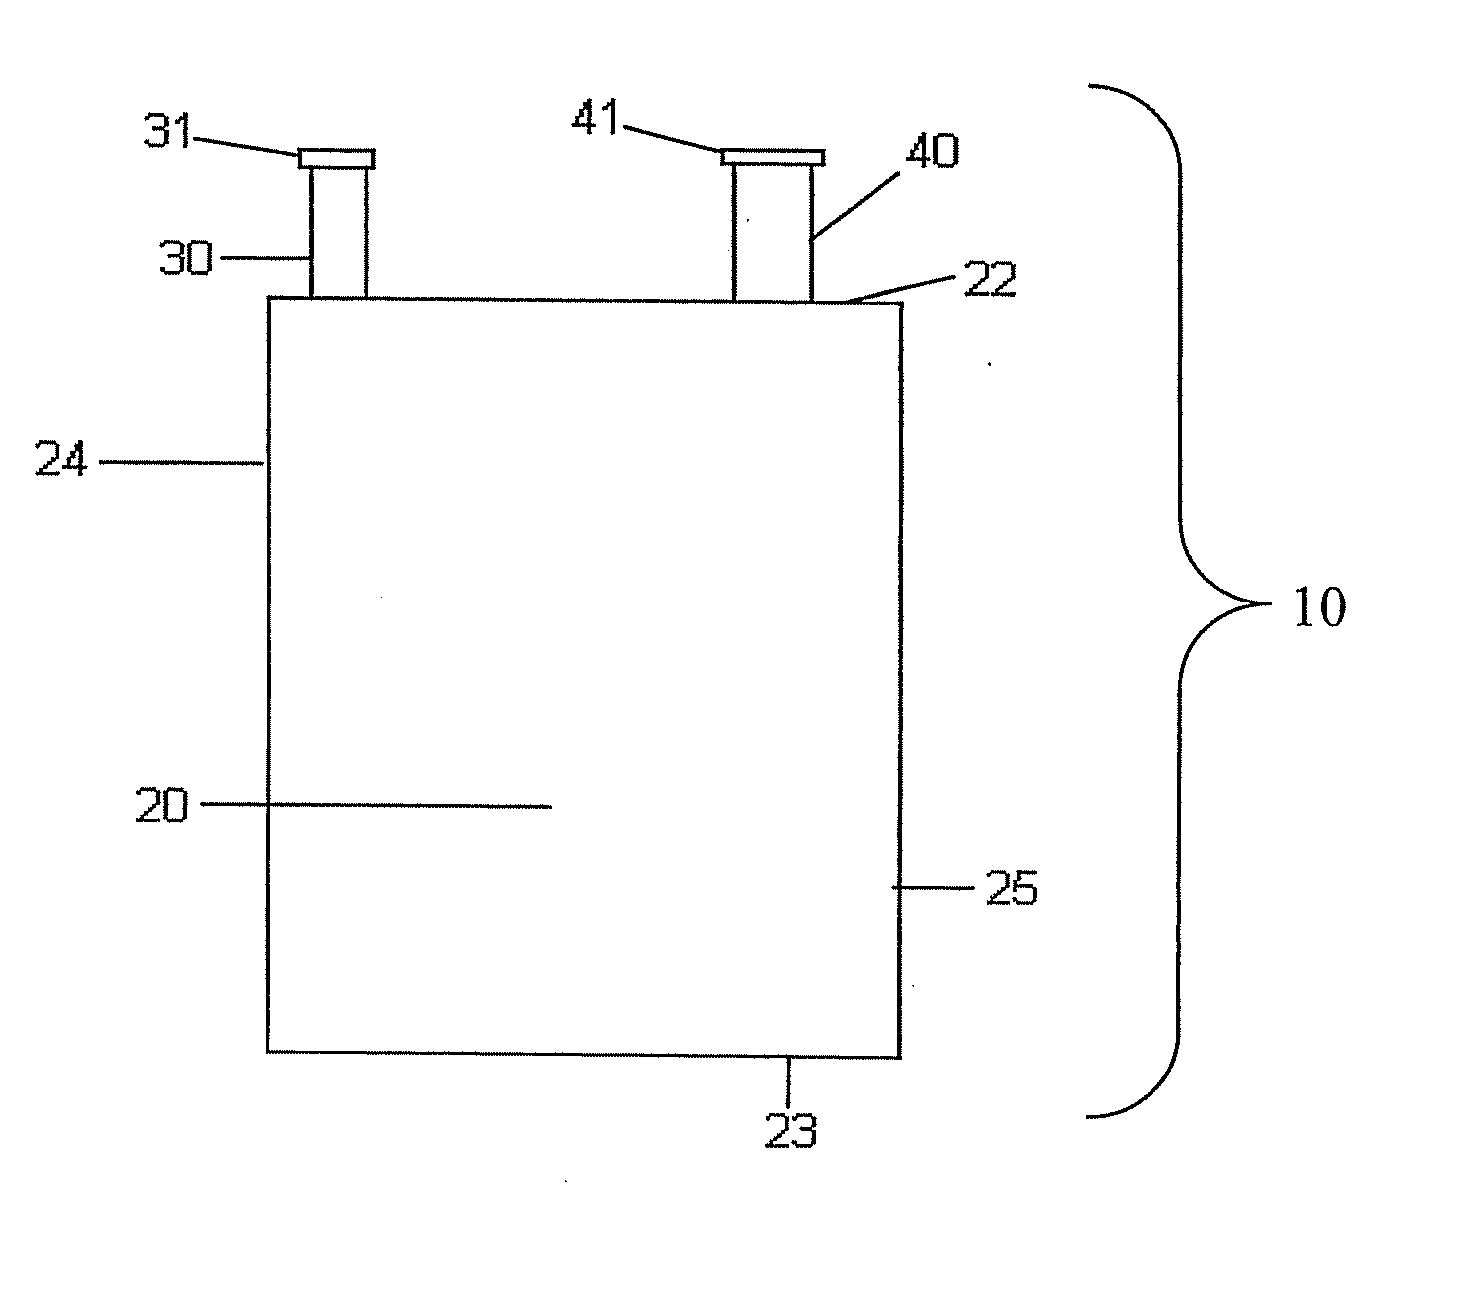 Cell Culture Apparatus and Methods